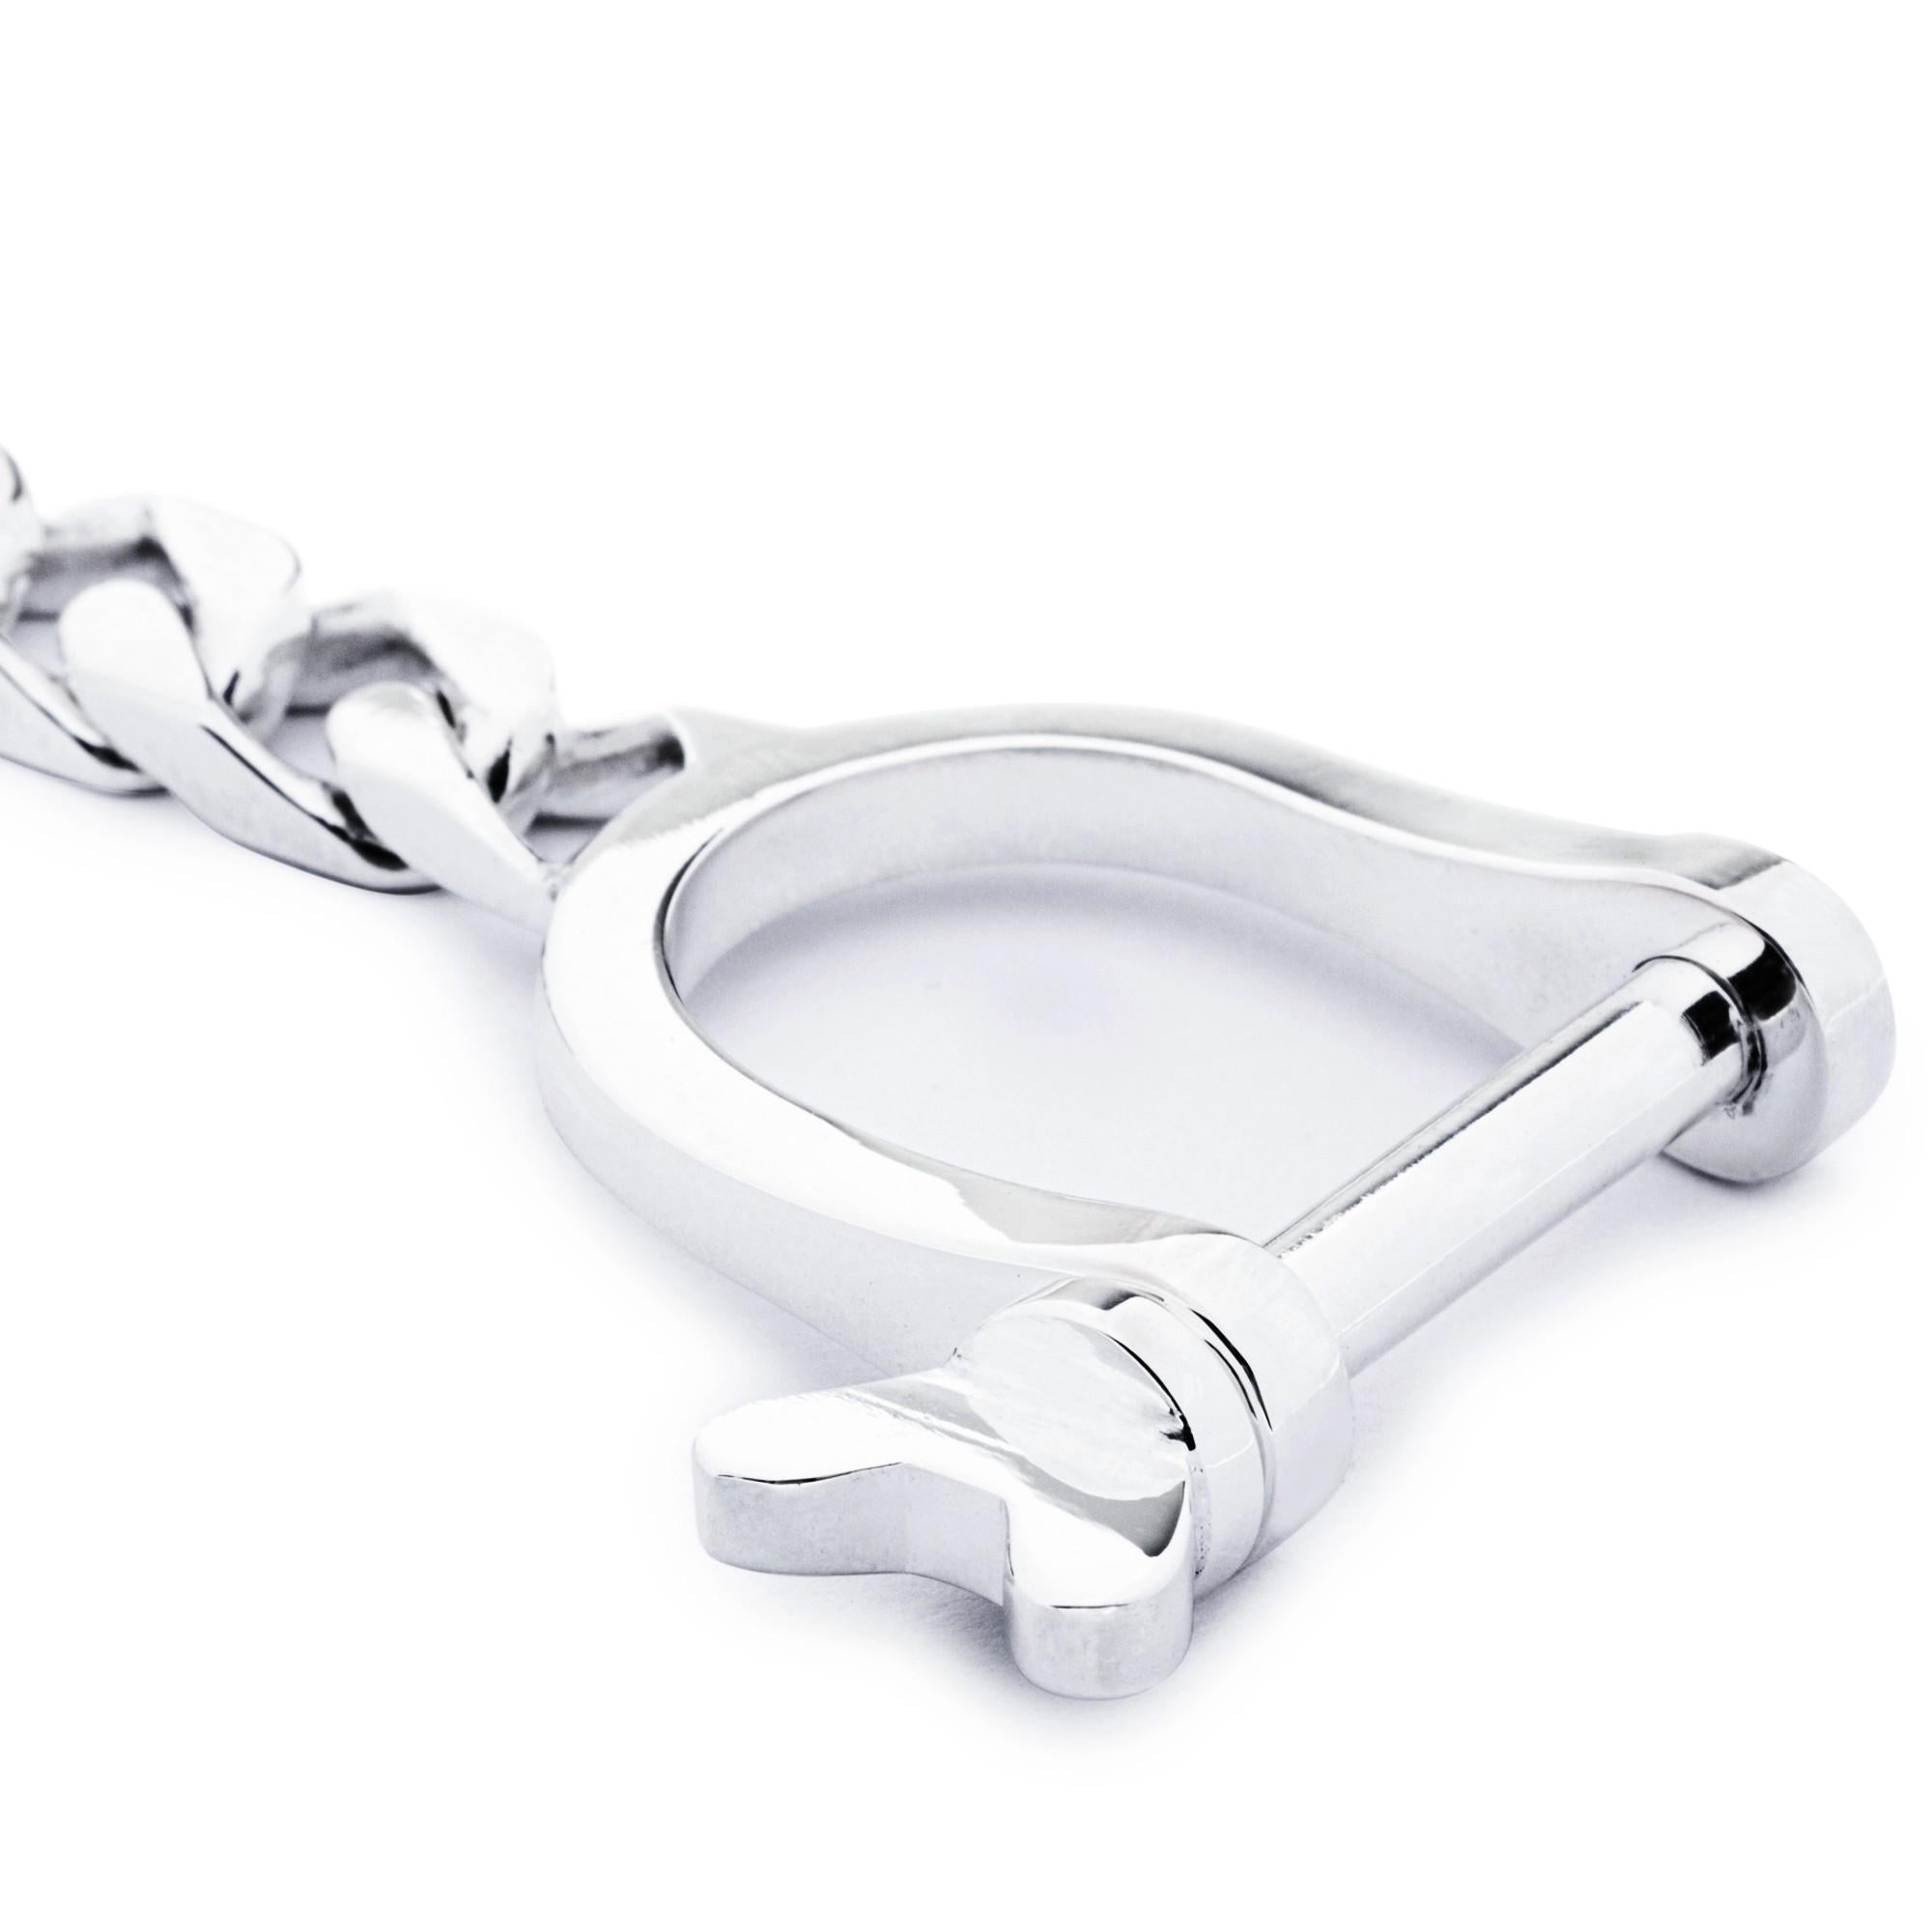 Alex Jona design collection, hand crafted in Italy, Sterling Silver double shackle key holder.
Alex Jona gifts stand out, not only for their special design and for the excellent quality, but also for the careful attention given to details during all